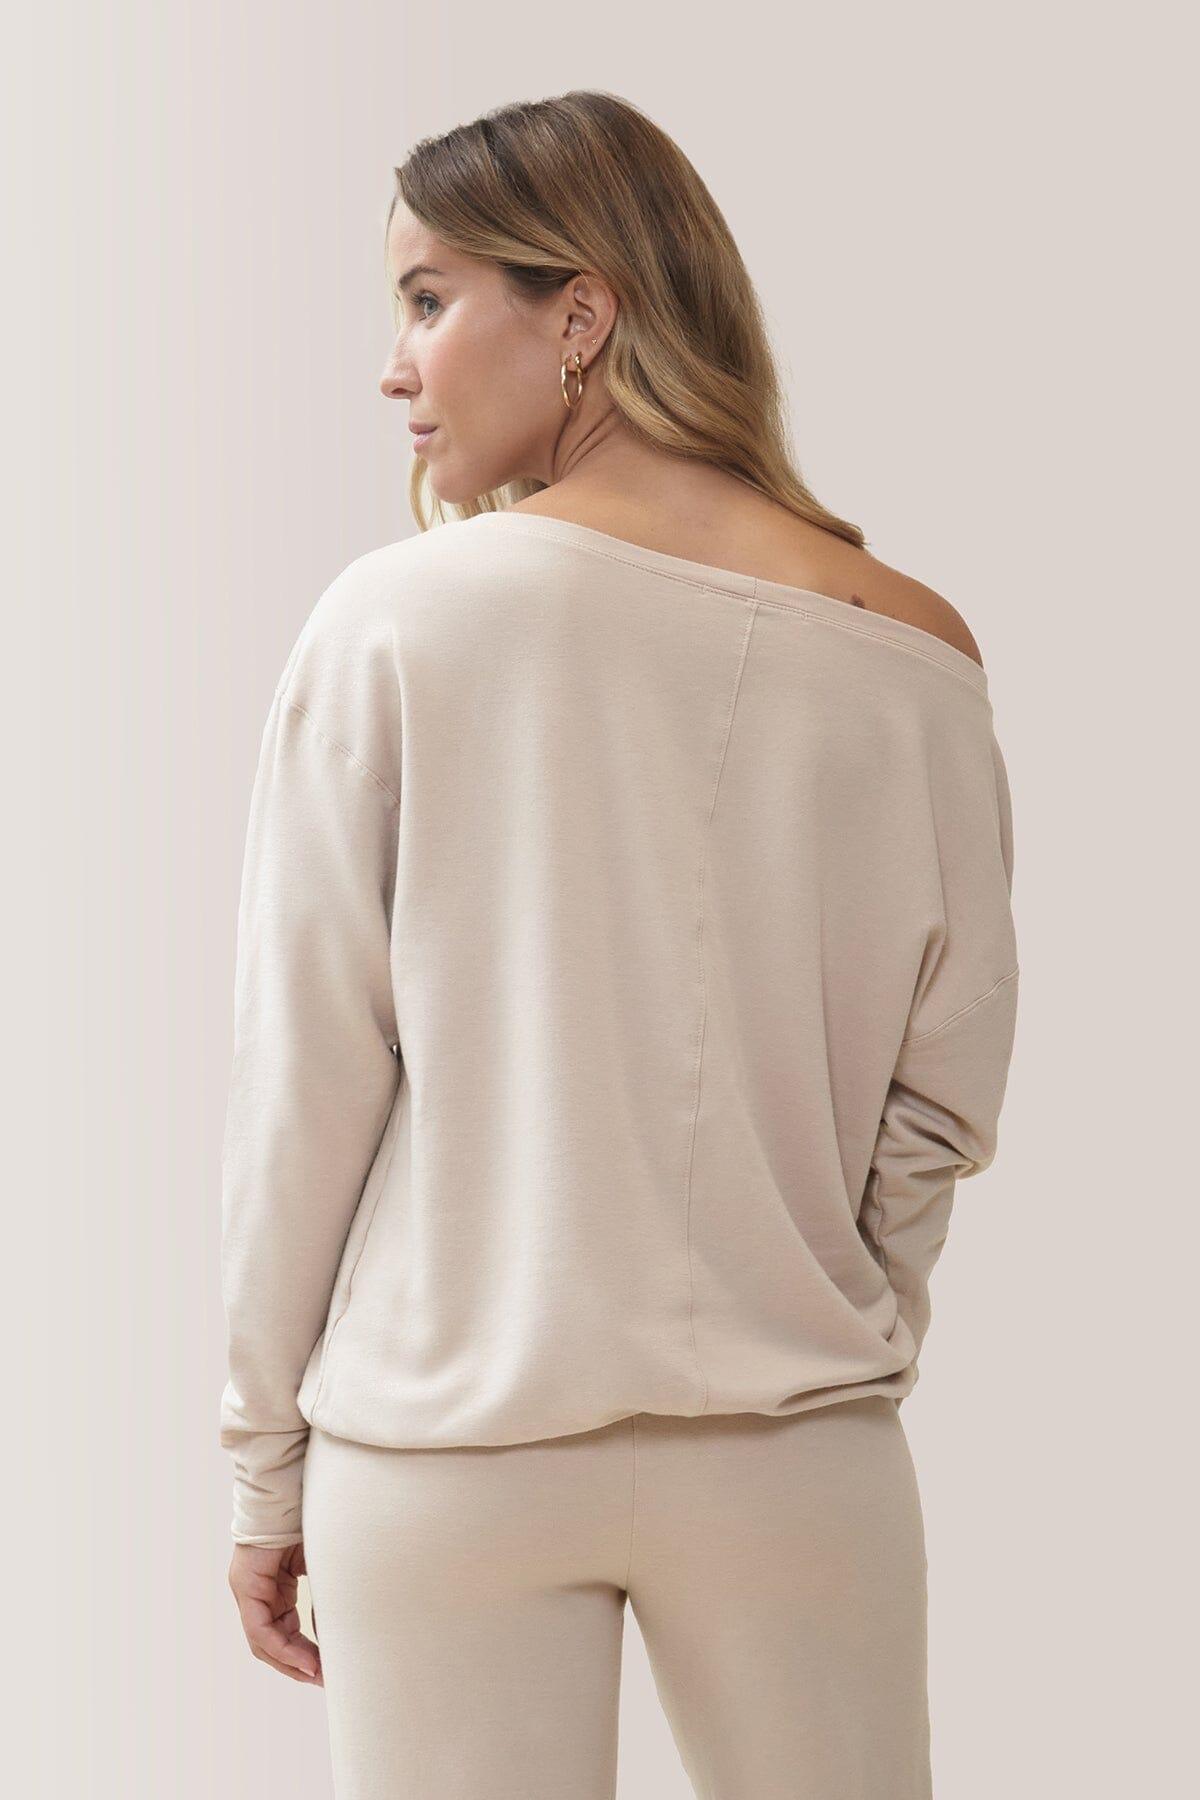 Femme qui porte le chandail Flashdance de Rose Boreal./ Women wearing the Flashdance pullover from Rose Boreal. - Sand Beige / Beige Sable